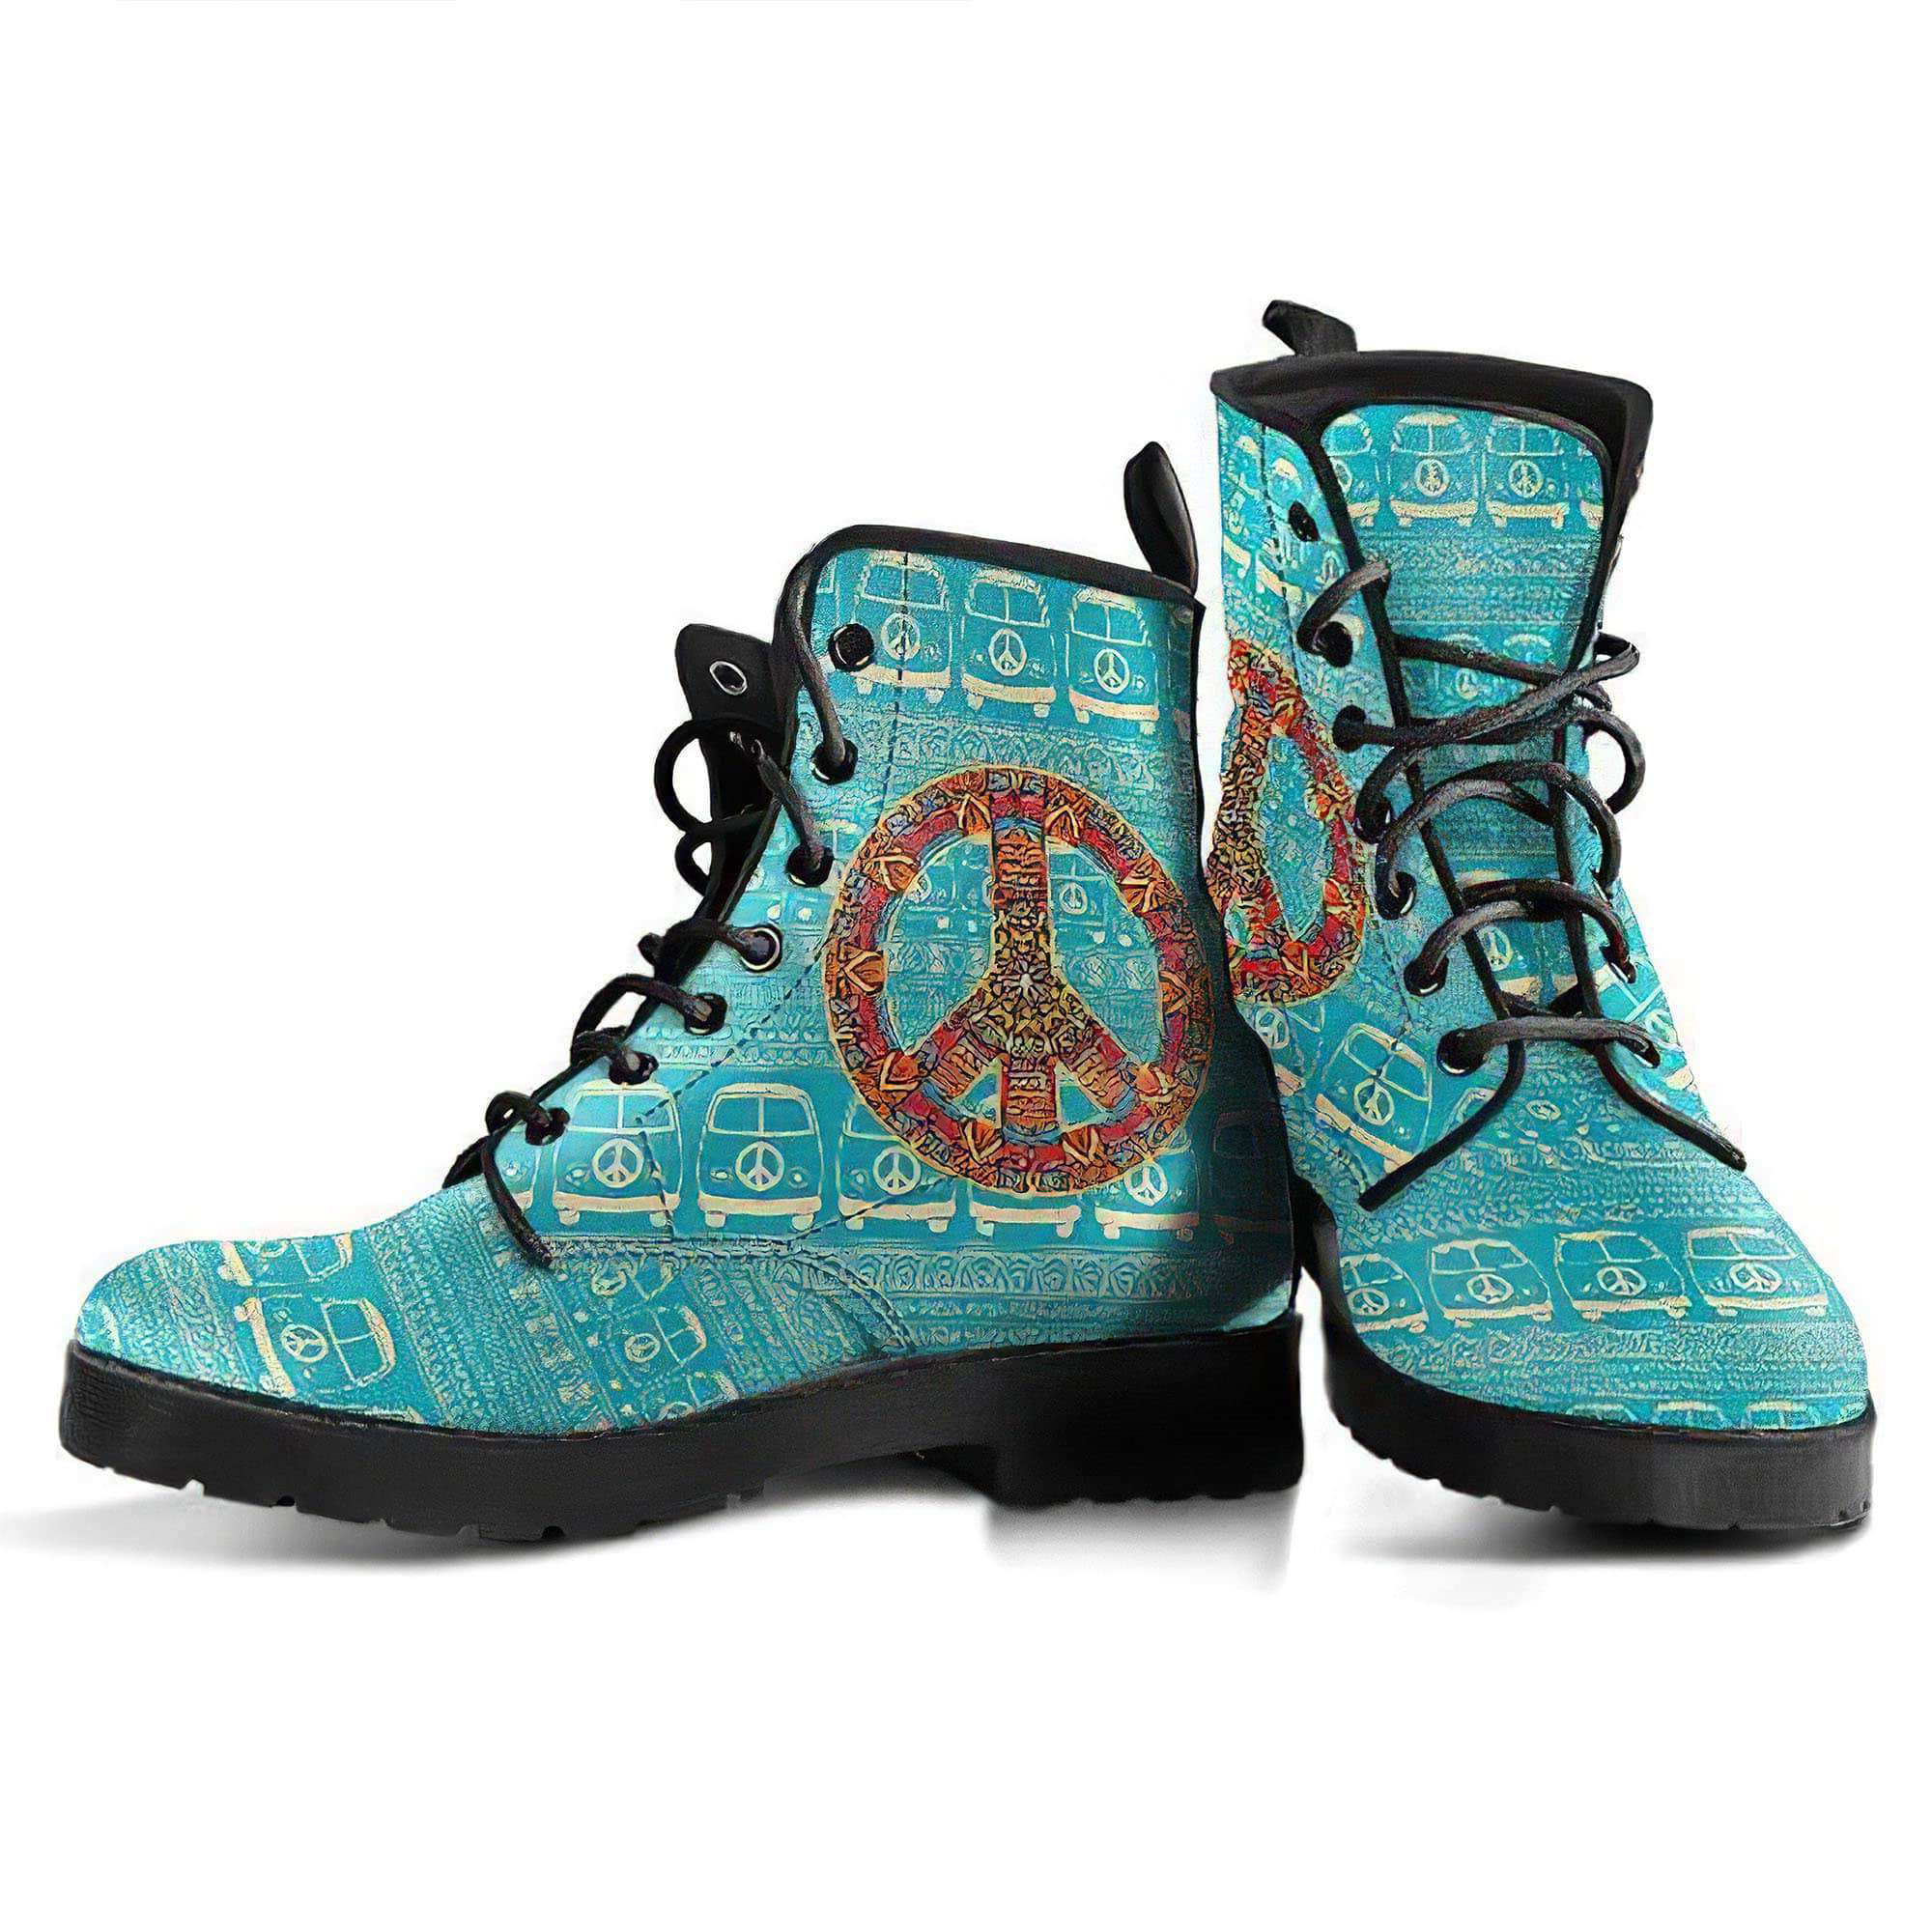 peace-hippie-bus-handcrafted-boots-women-s-leather-boots-12051926384701.jpg